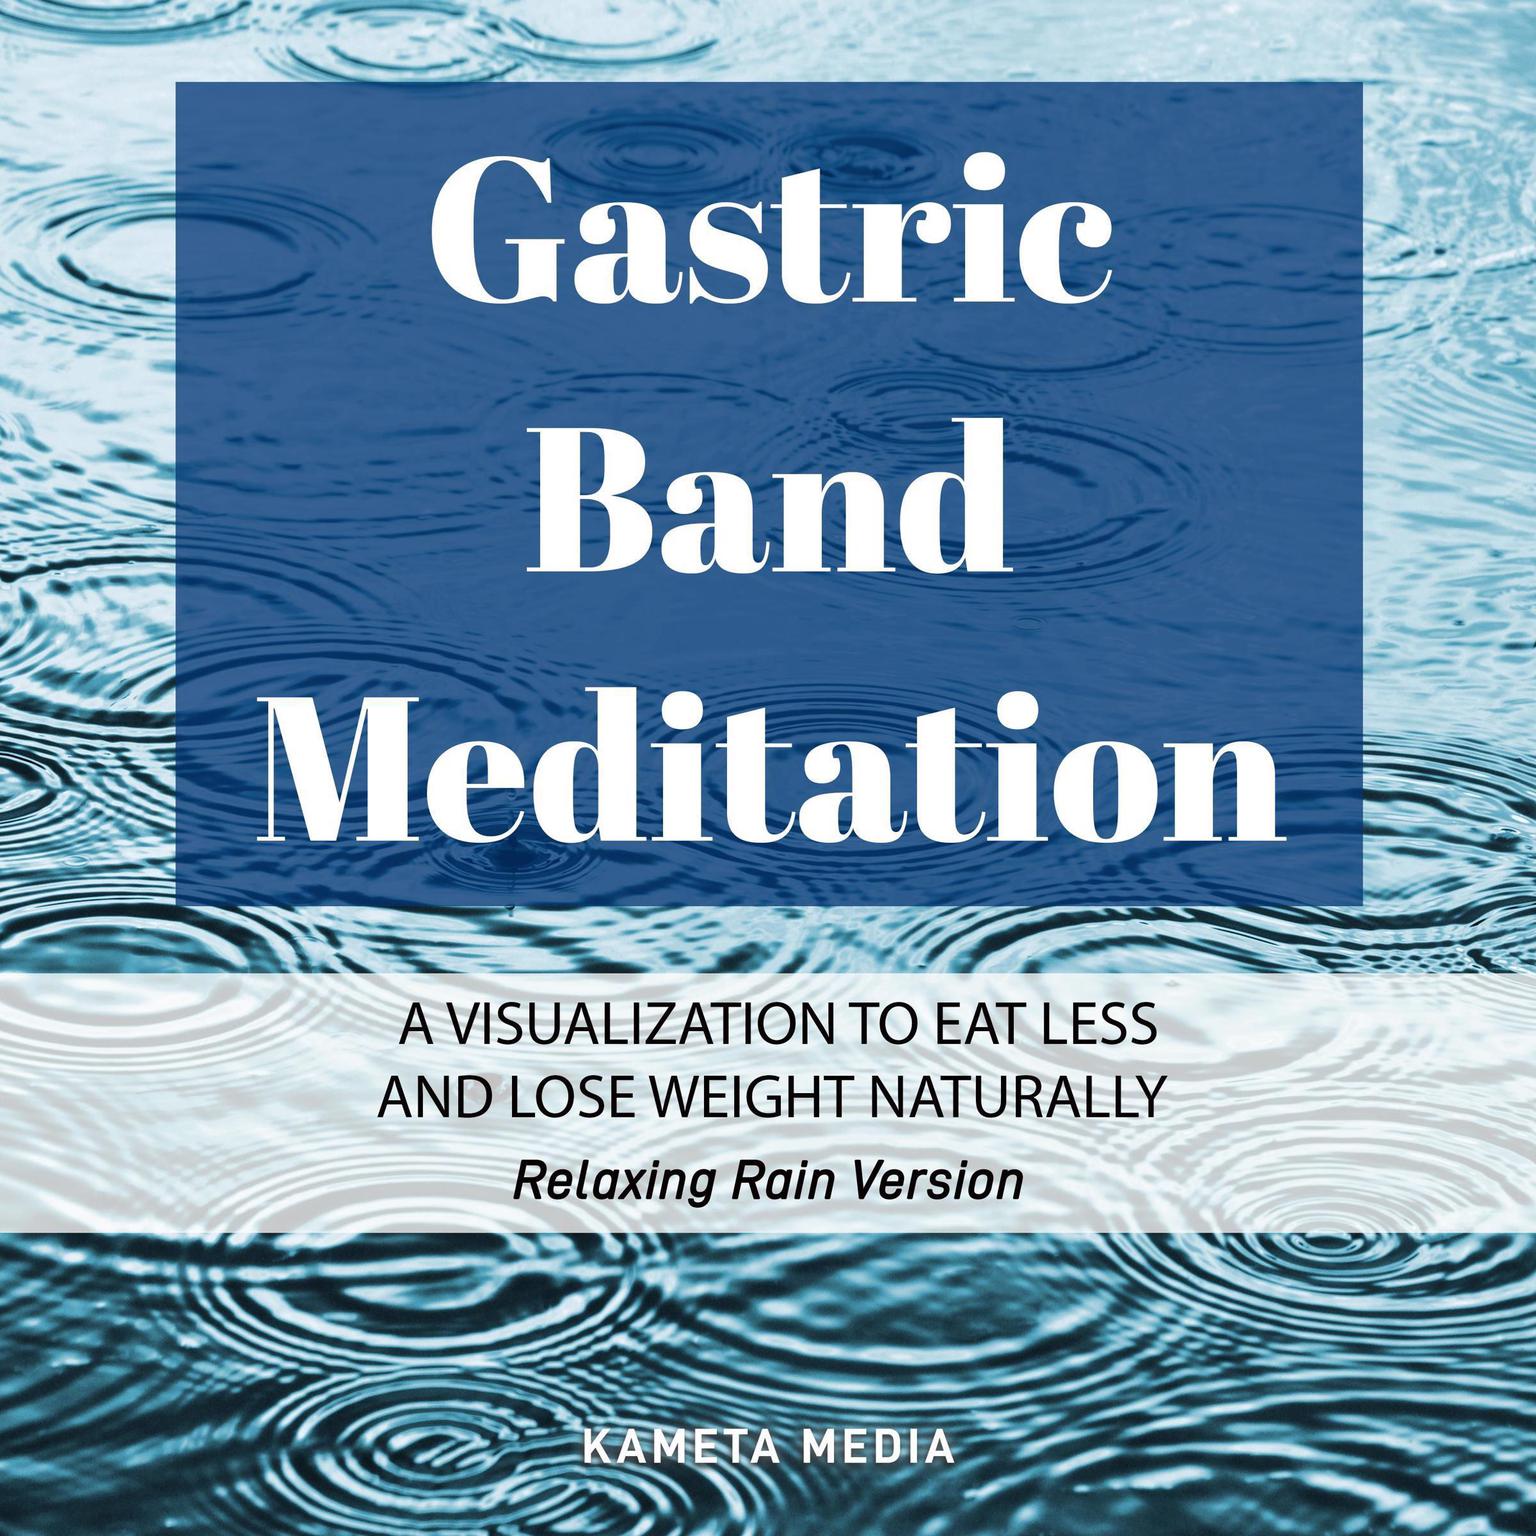 Gastric Band Meditation: A Visualization to Eat Less and Lose Weight Naturally (Relaxing Rain Version) Audiobook, by Kameta Media